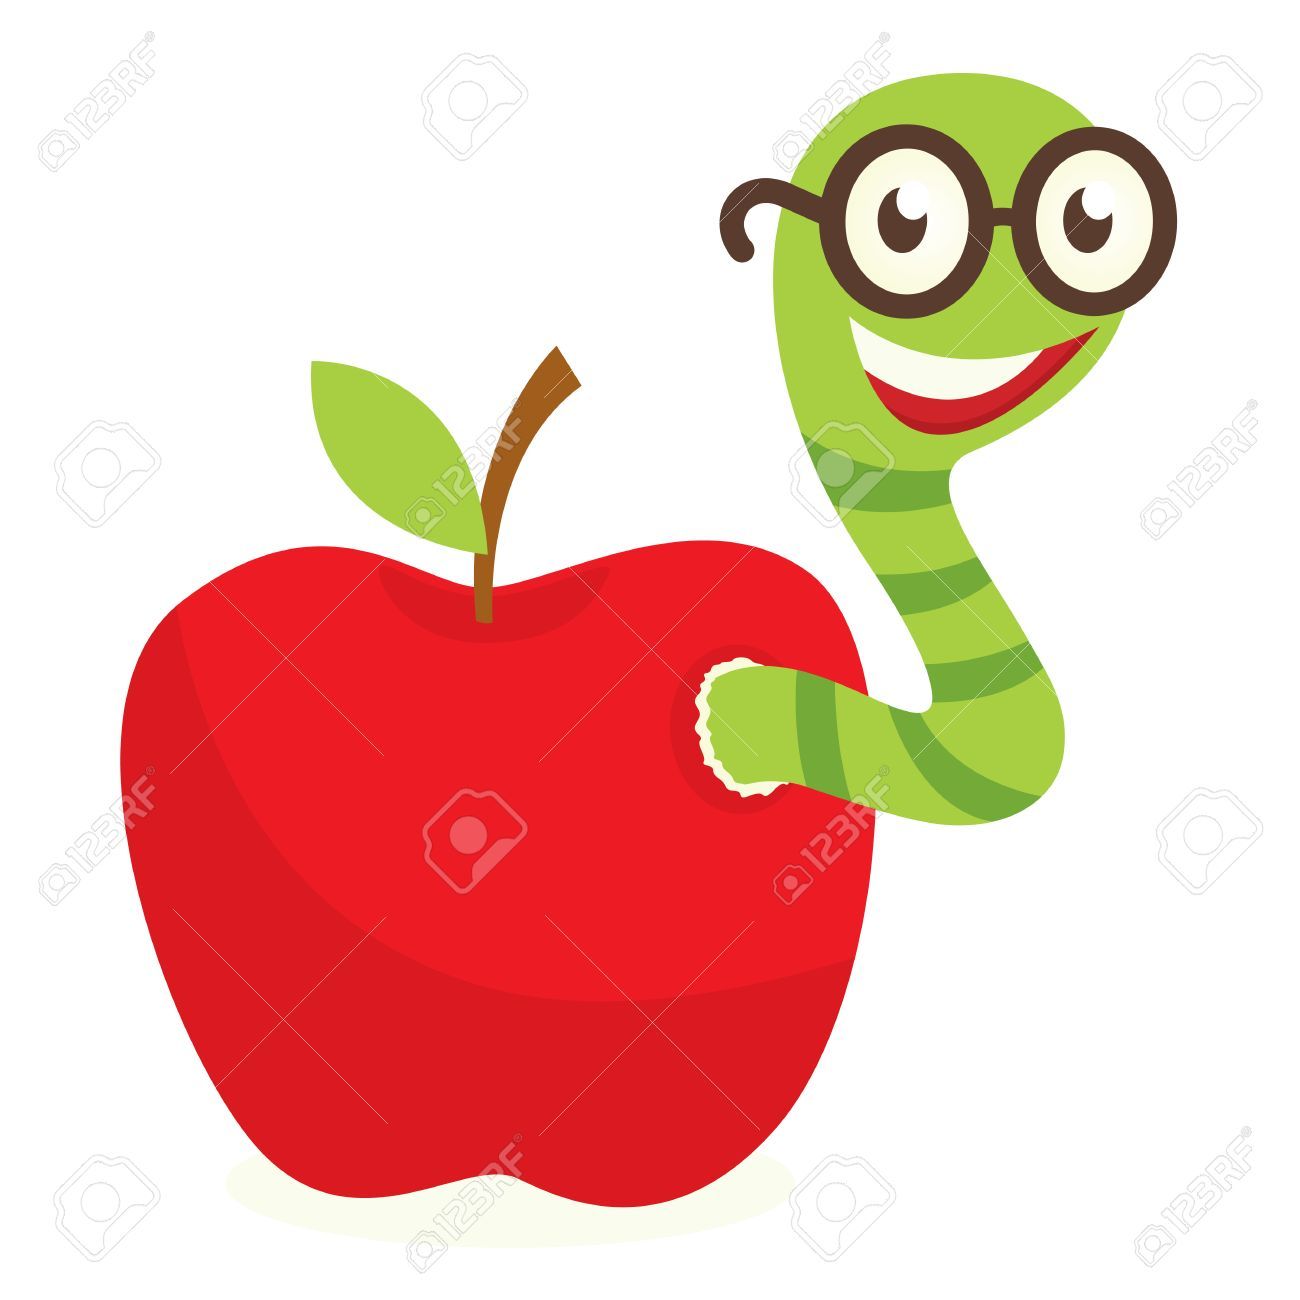 Apple with worm.